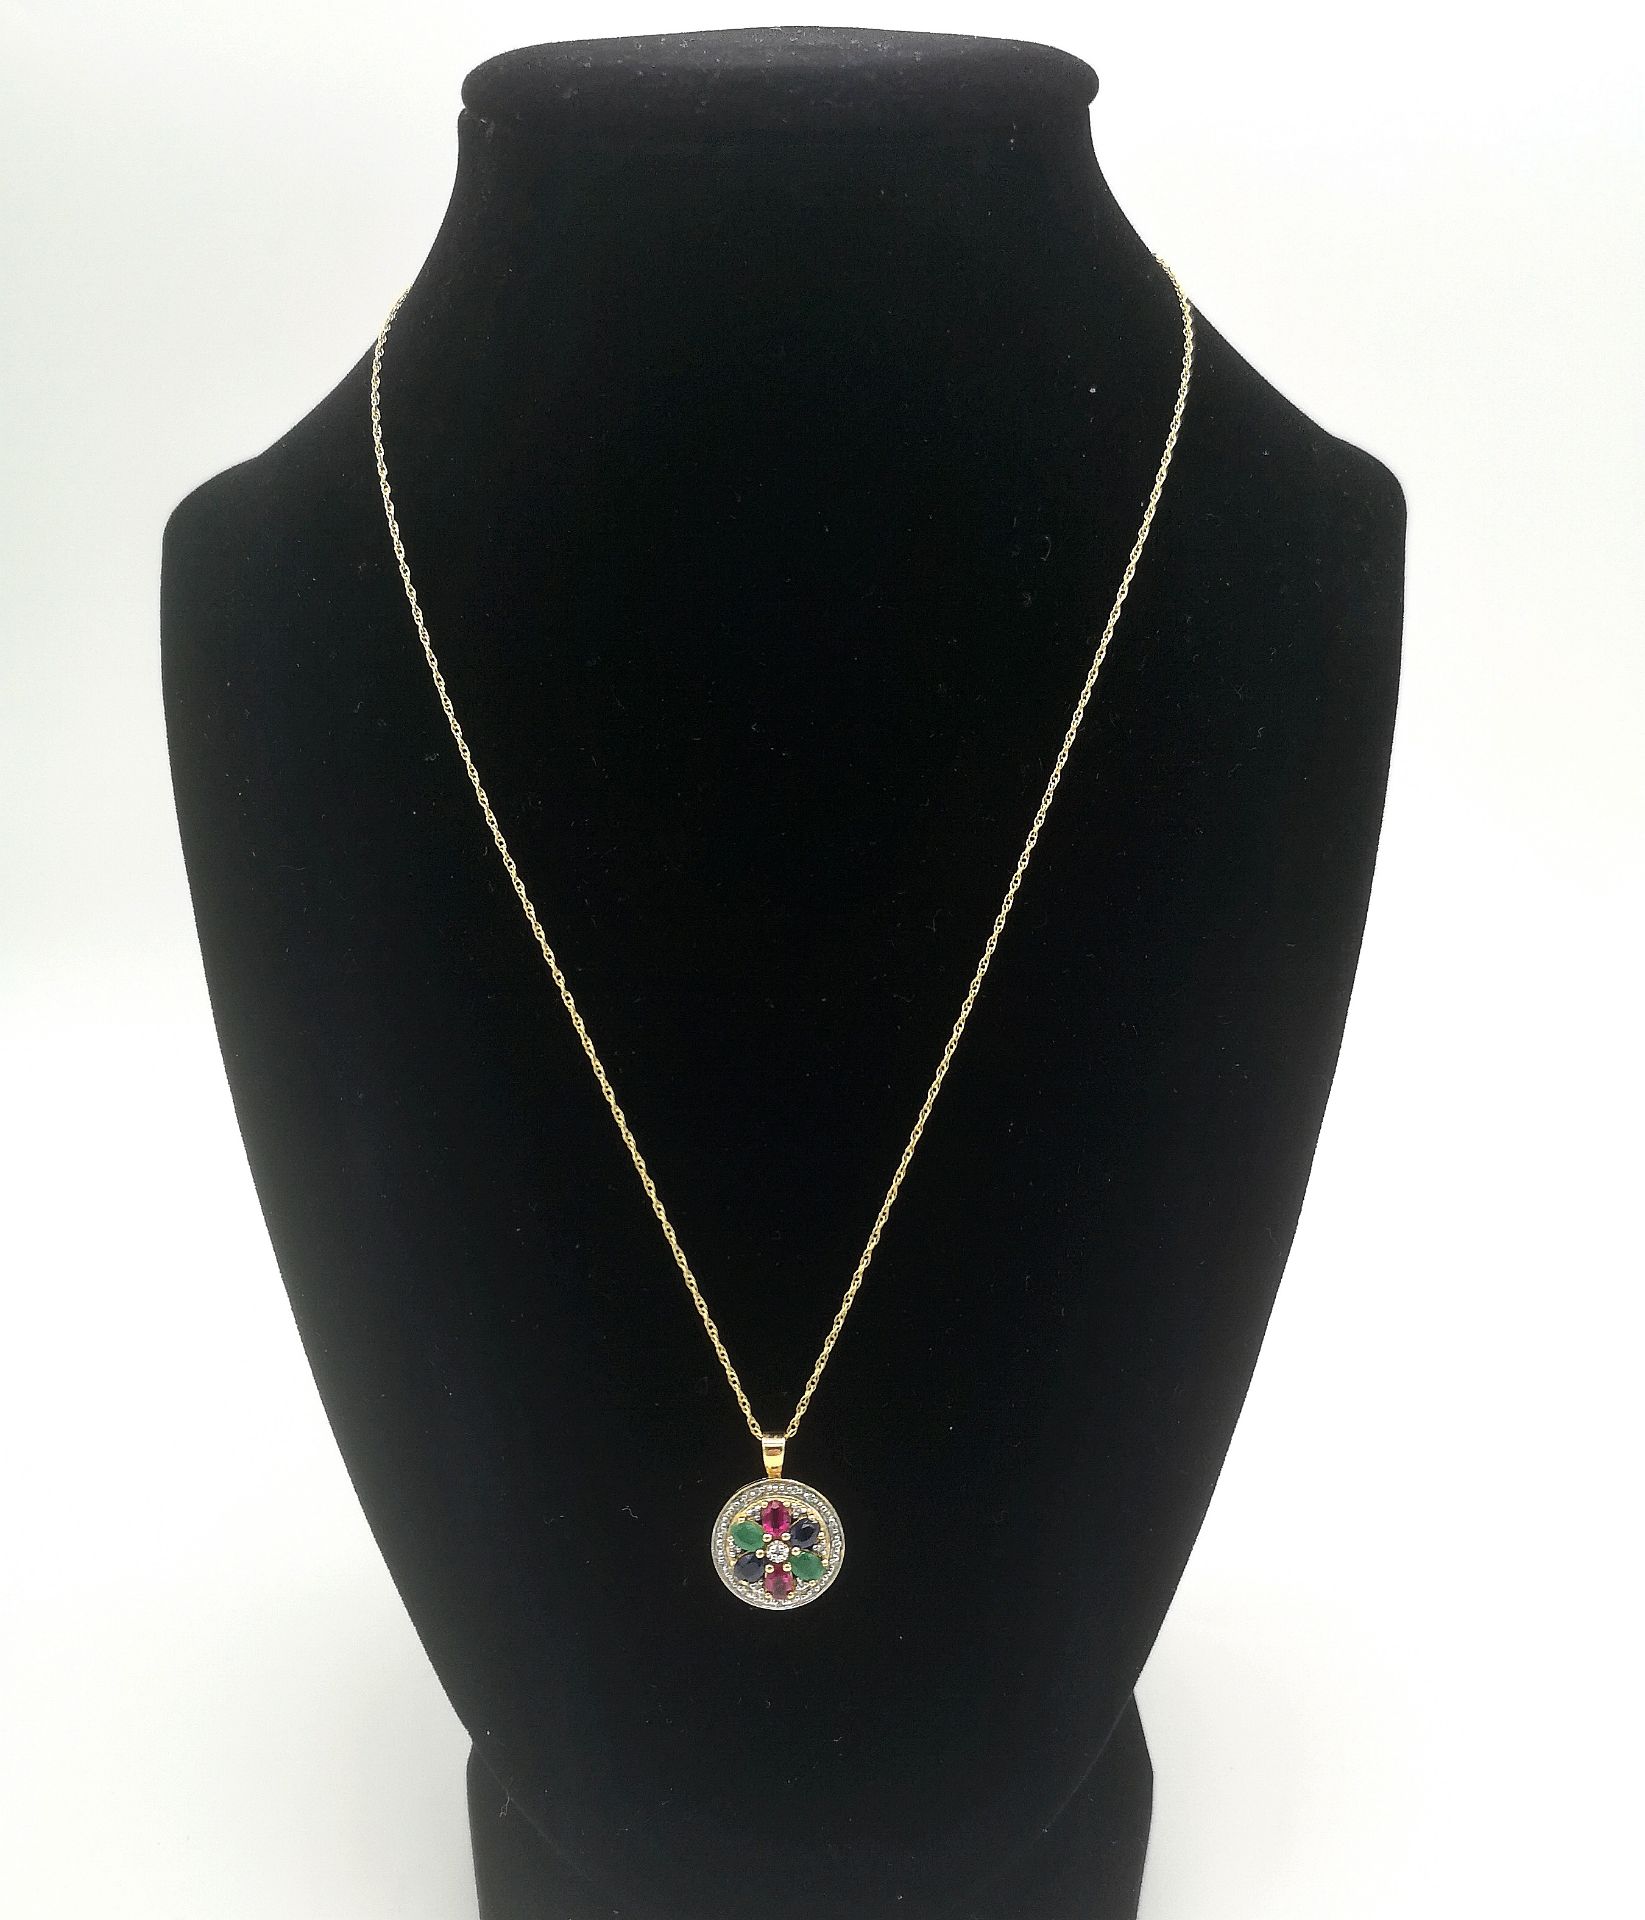 9ct gold pendant set with rubies, emeralds and sapphires